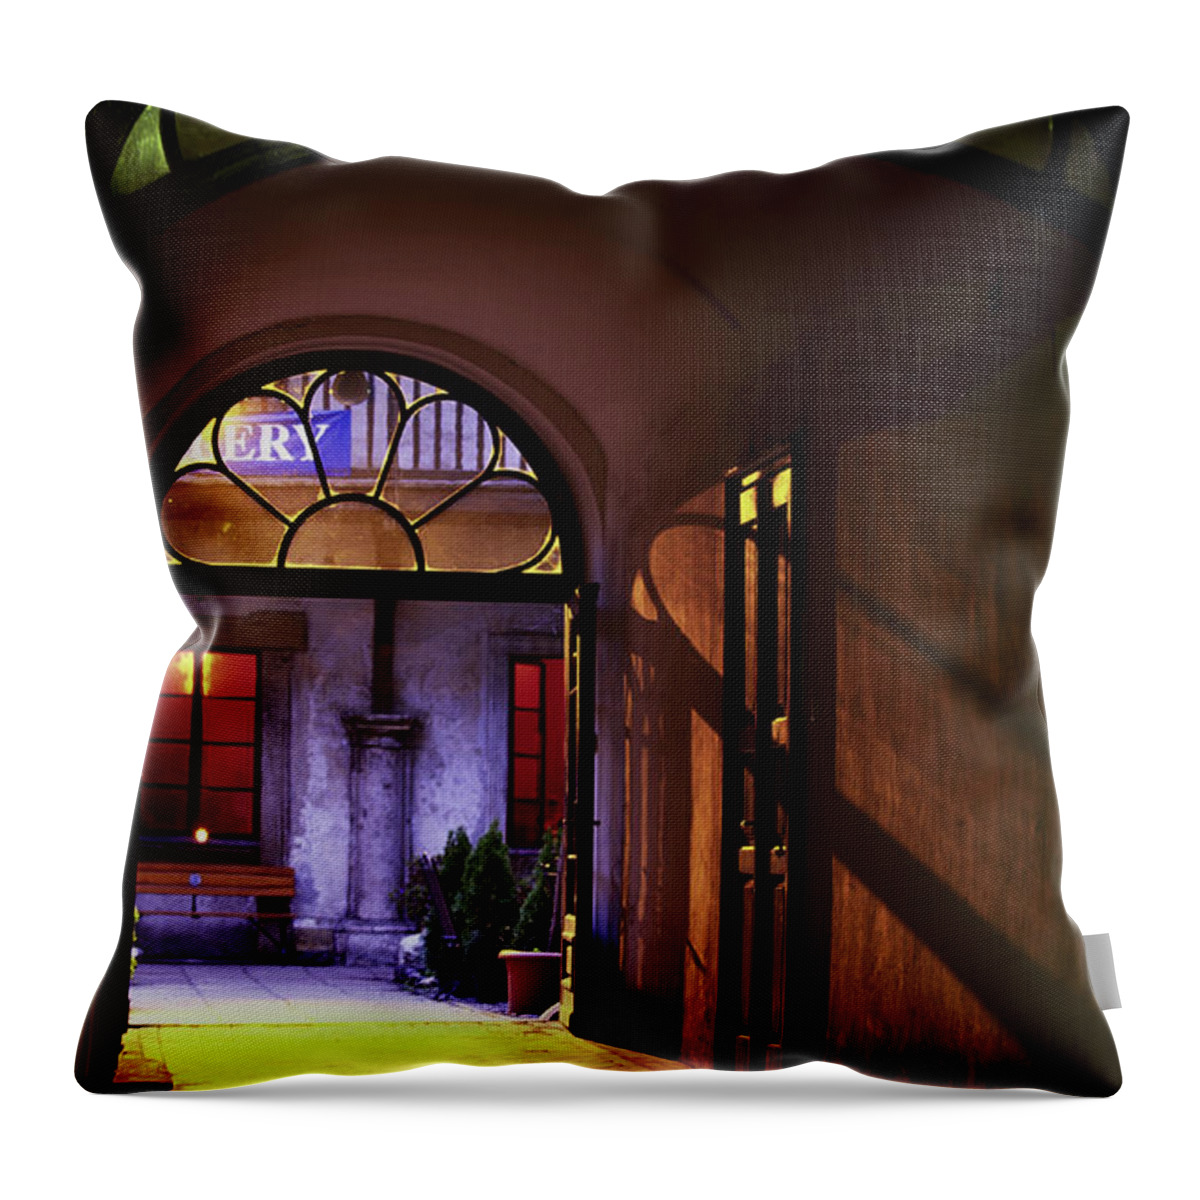 Town Throw Pillow featuring the photograph Old Town Colorful Alley, St John by Walter Bibikow